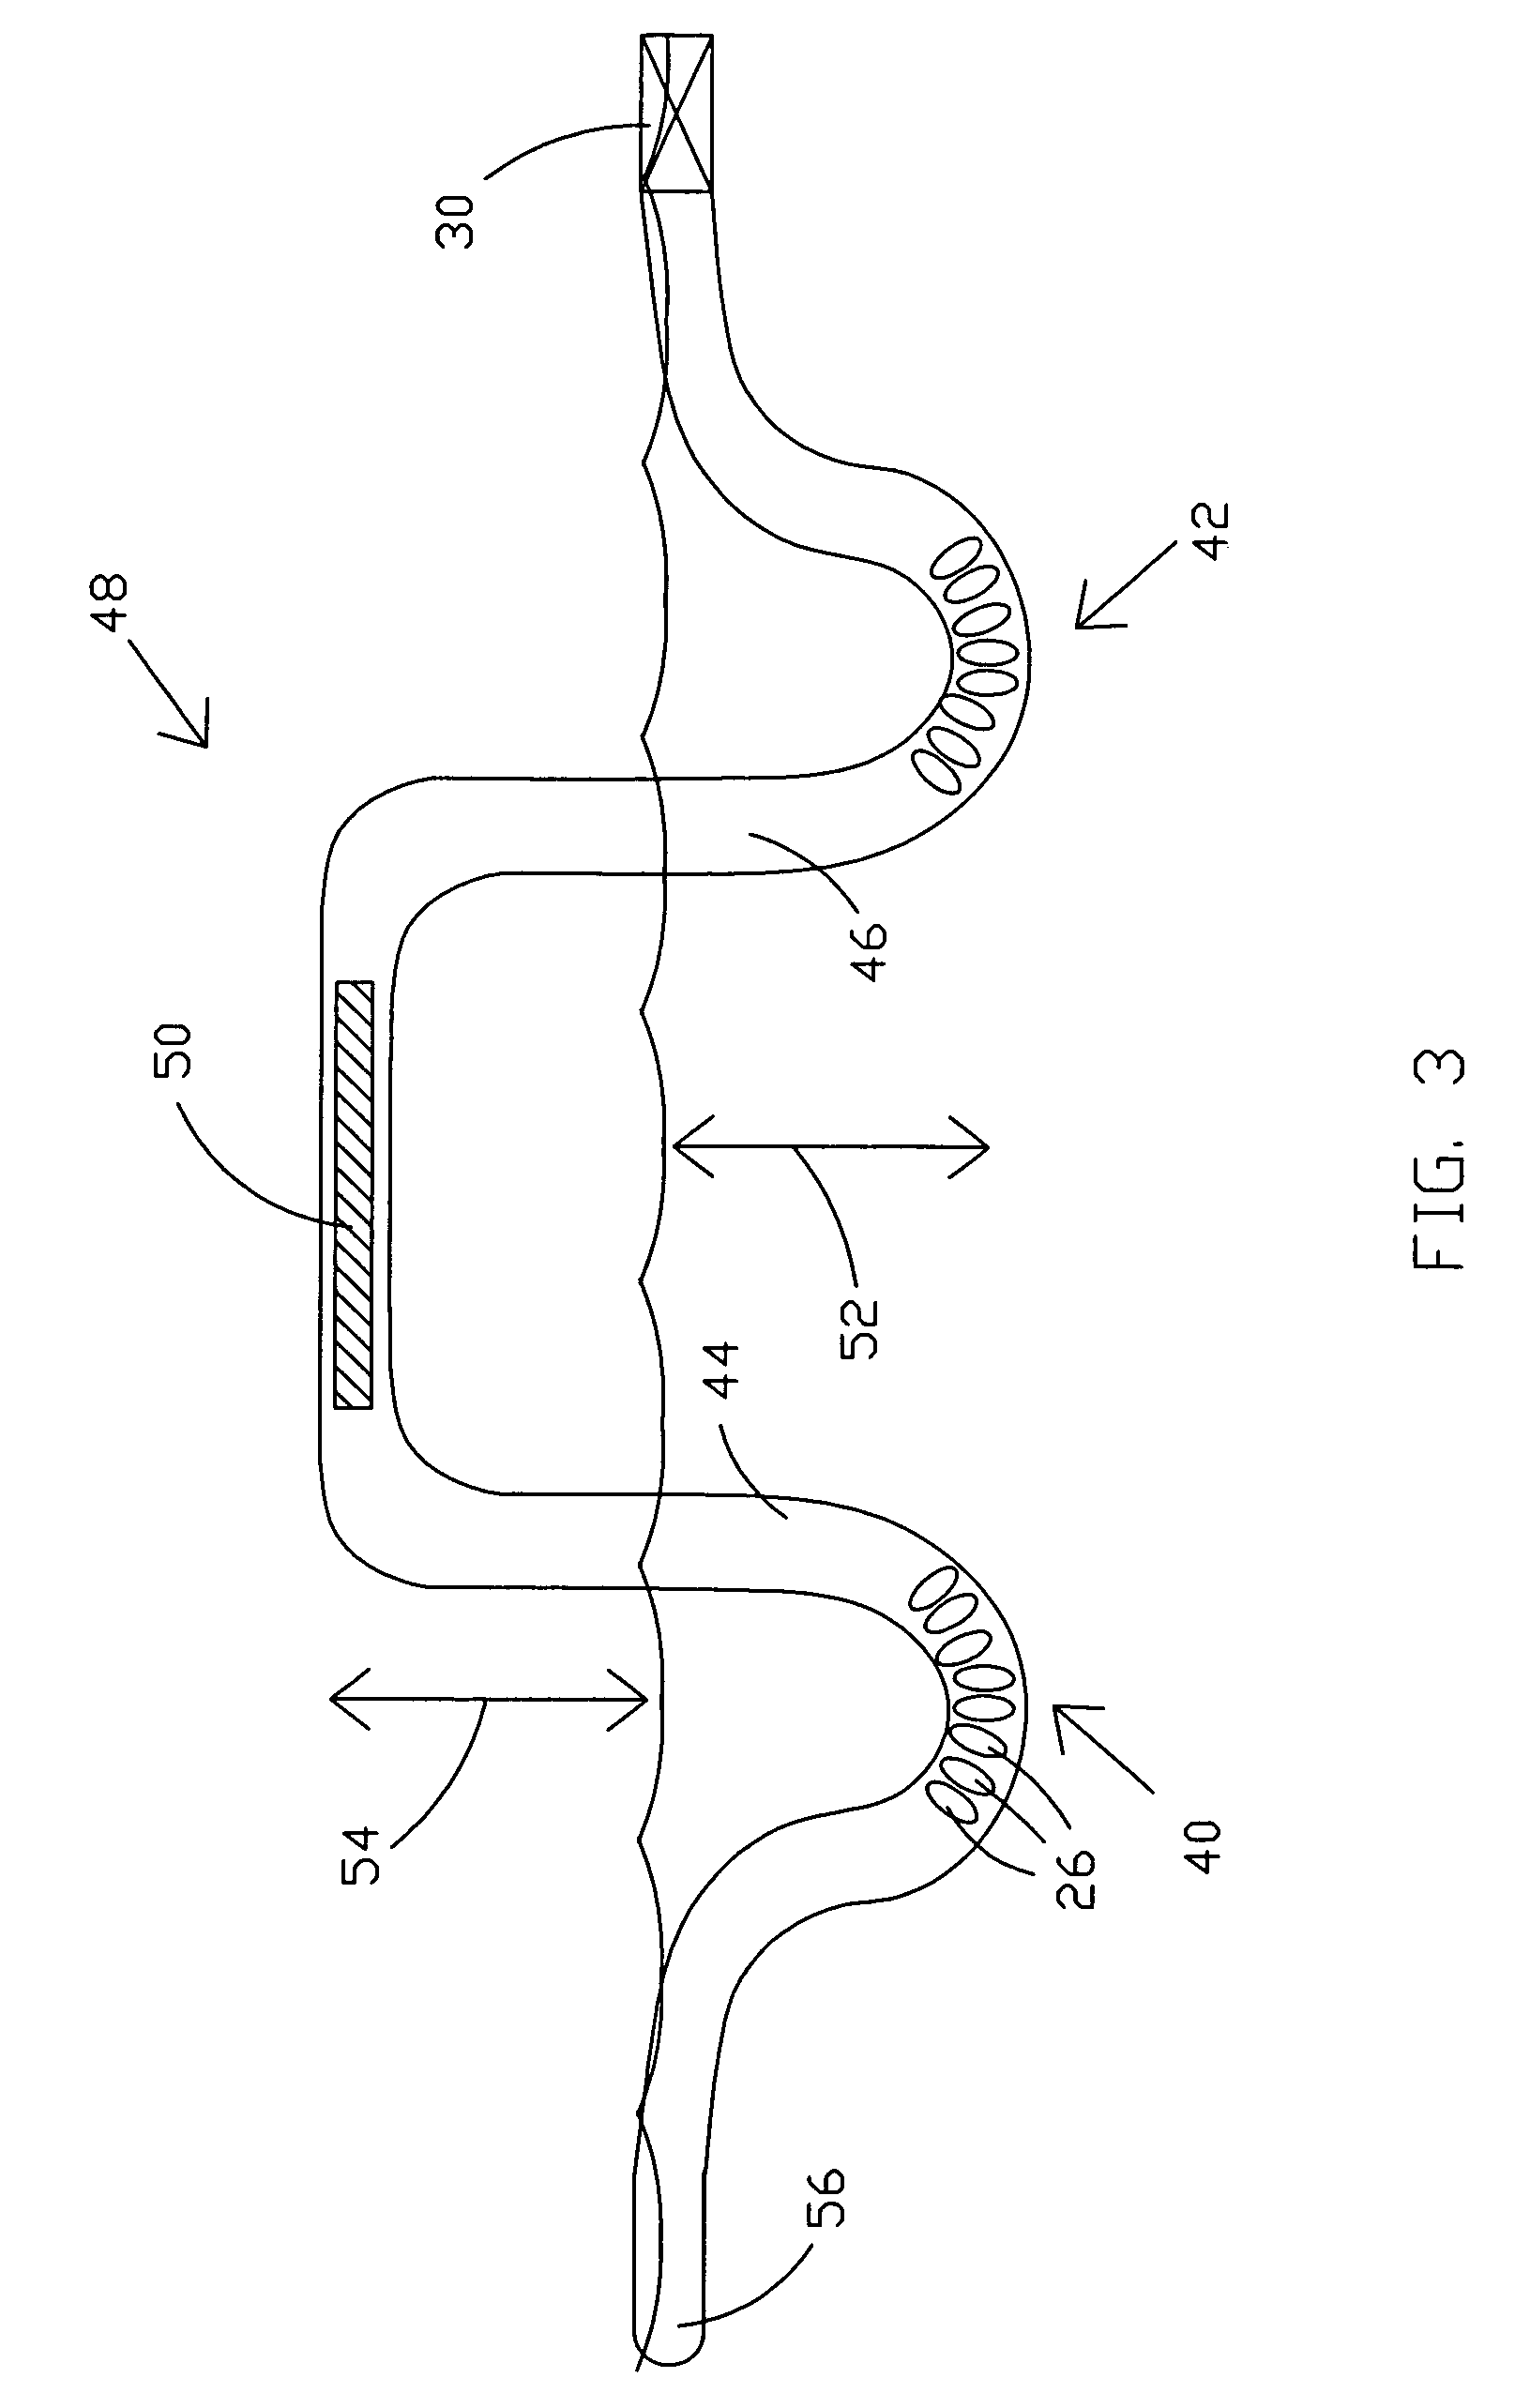 Buoyant cable antenna configuration and system